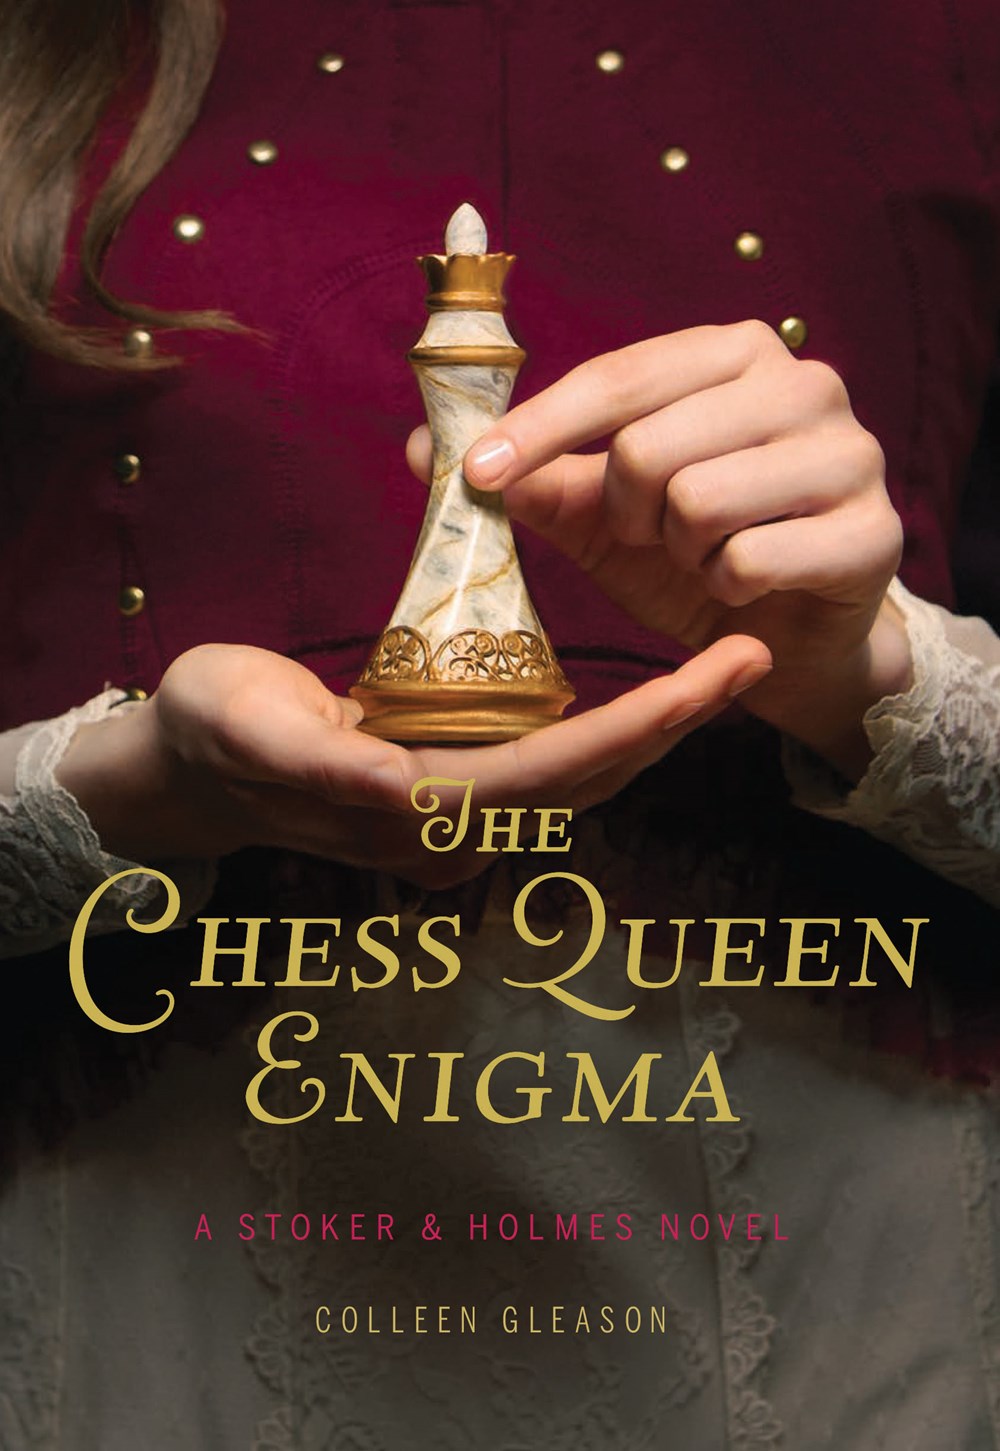 The Chess Queen Enigma by Colleen Gleason Book Cover.jpg